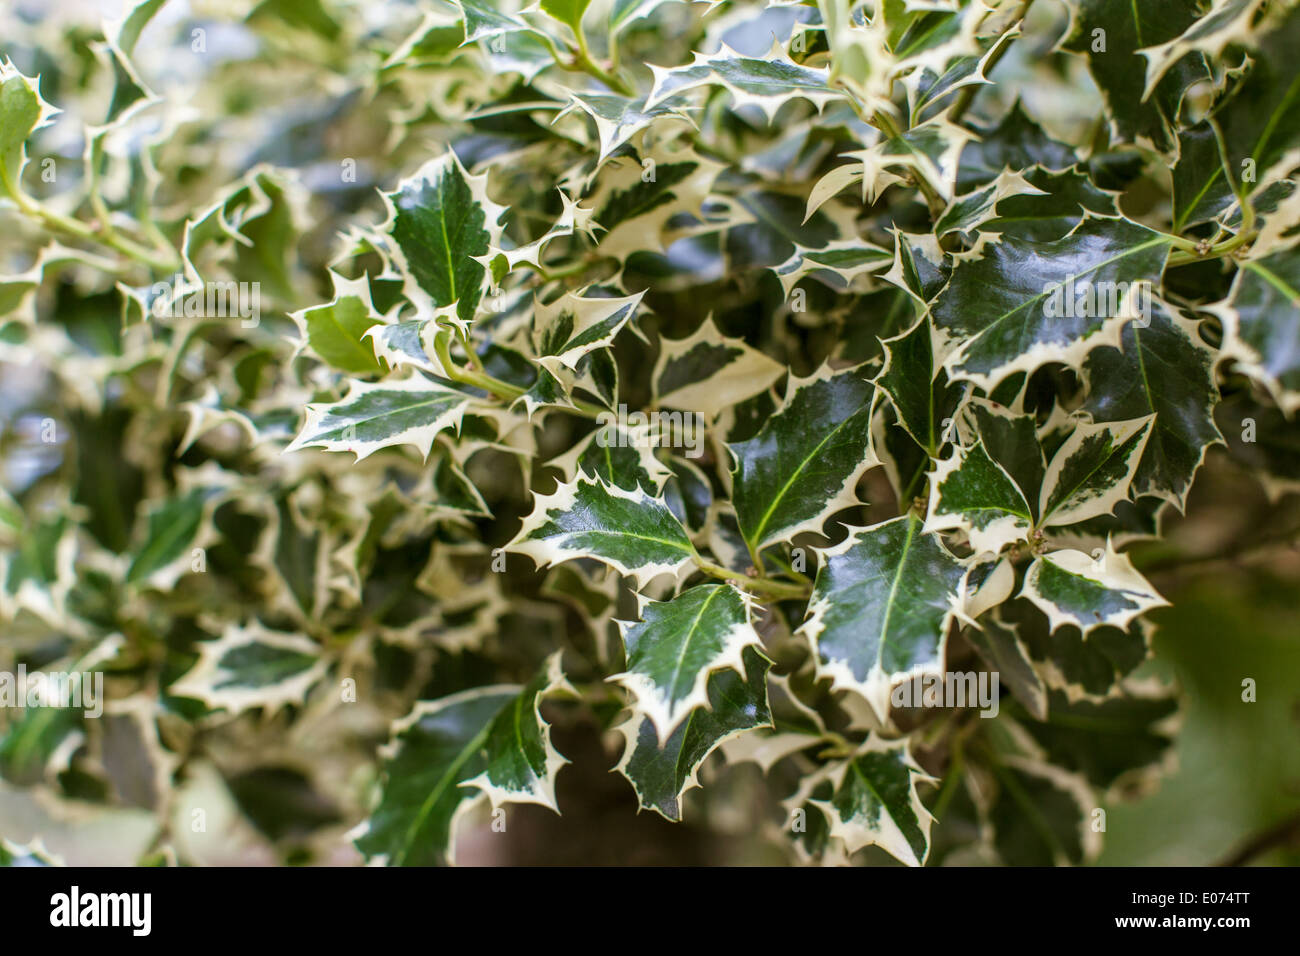 macro shot of a holly bush with a lot of green leaves and no berries Stock Photo